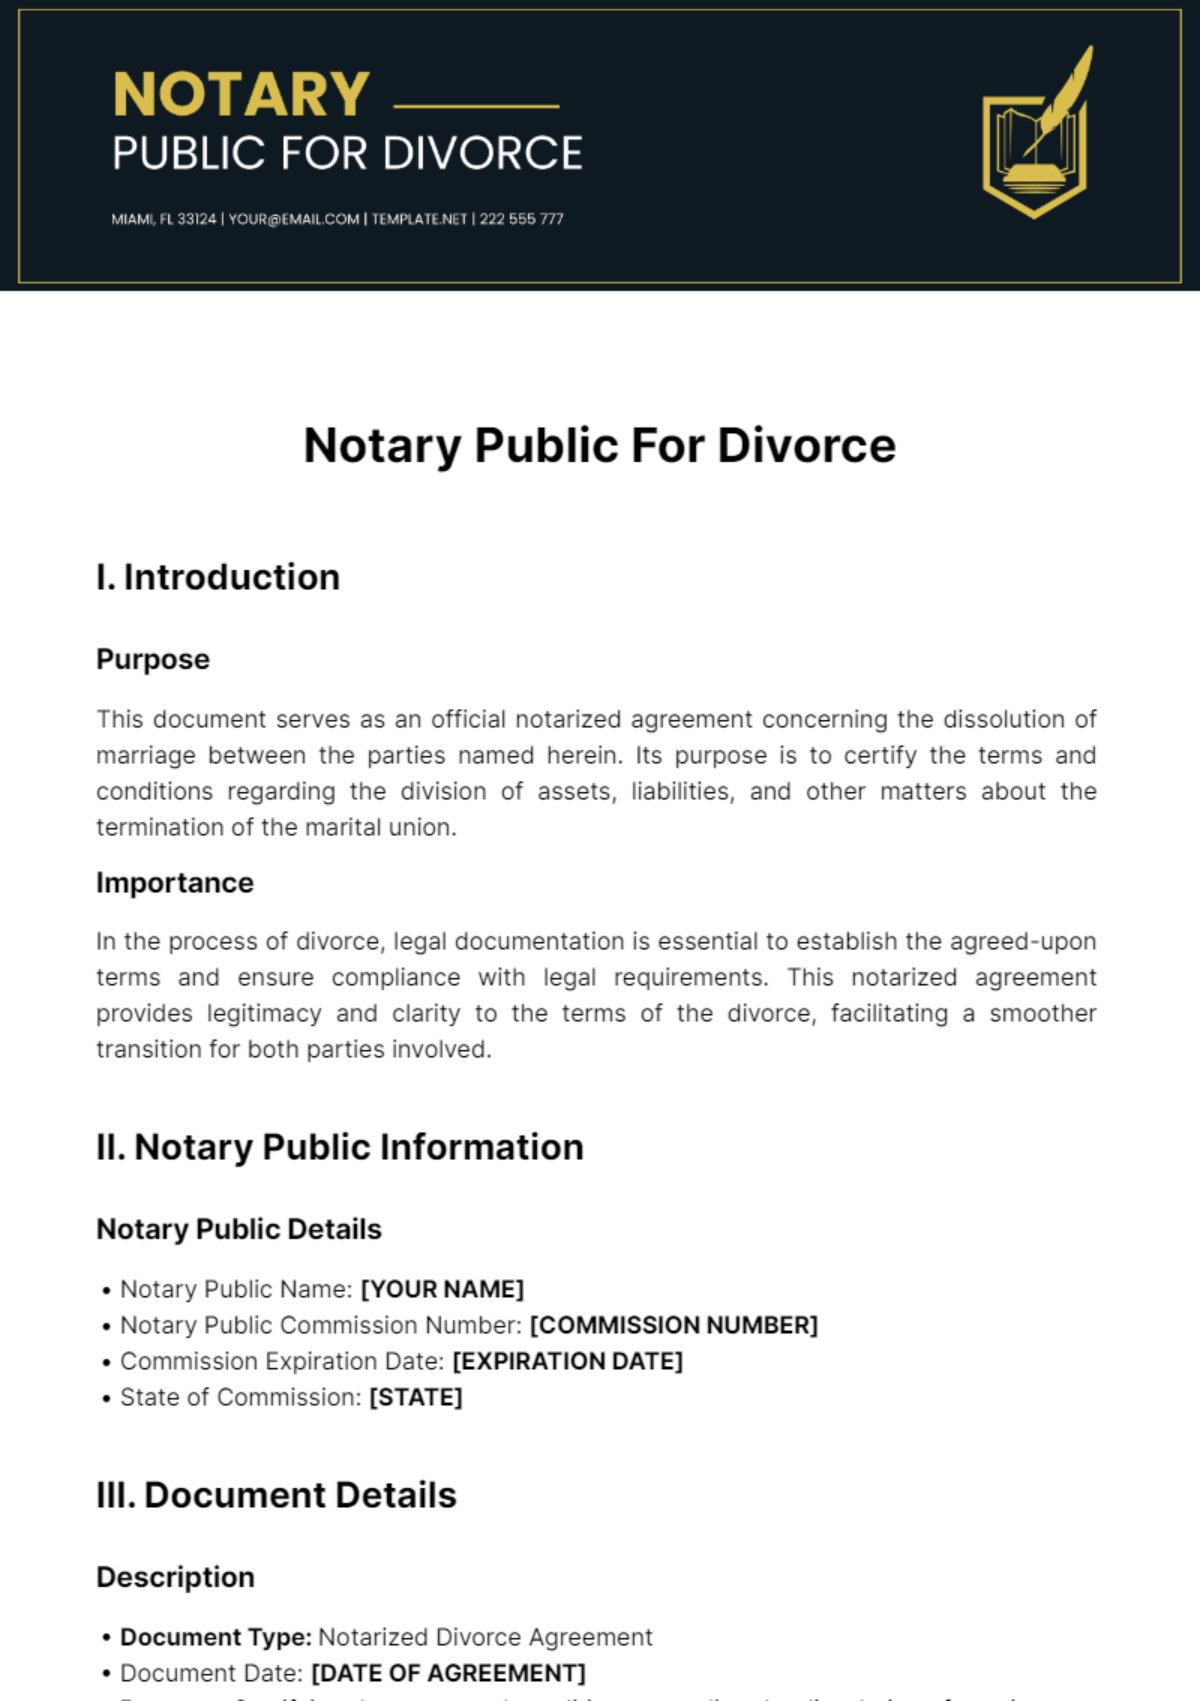 Free Notary Public For Divorce Template